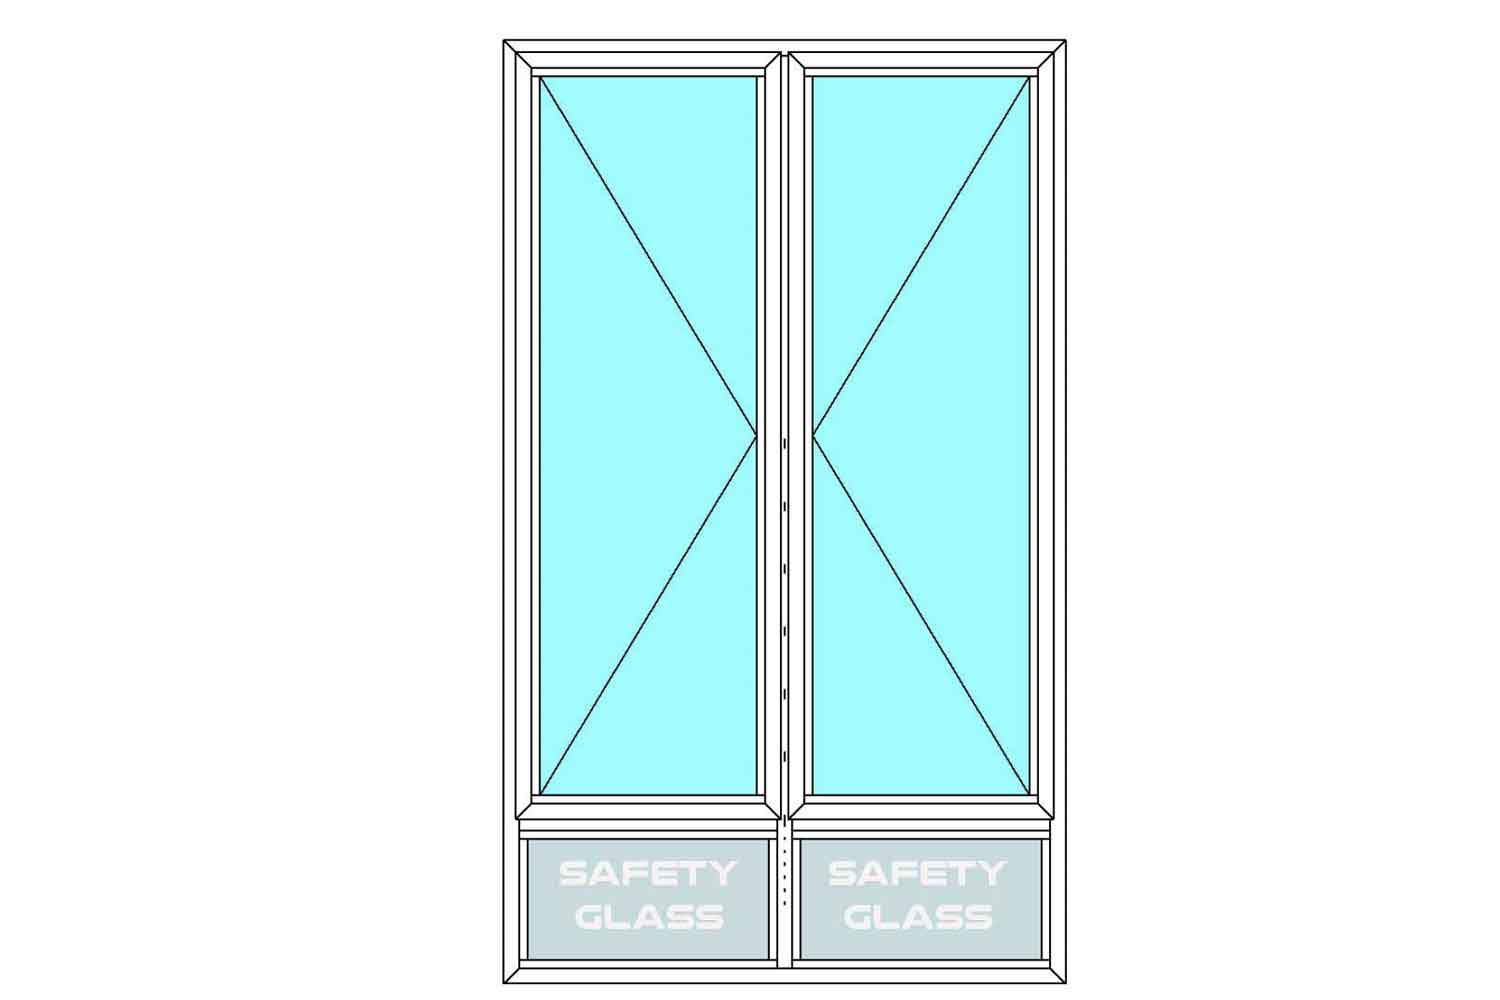 Aluminium Window - Two Side Hung Windows and Two Fixed Fields 1066mm x 1790mm